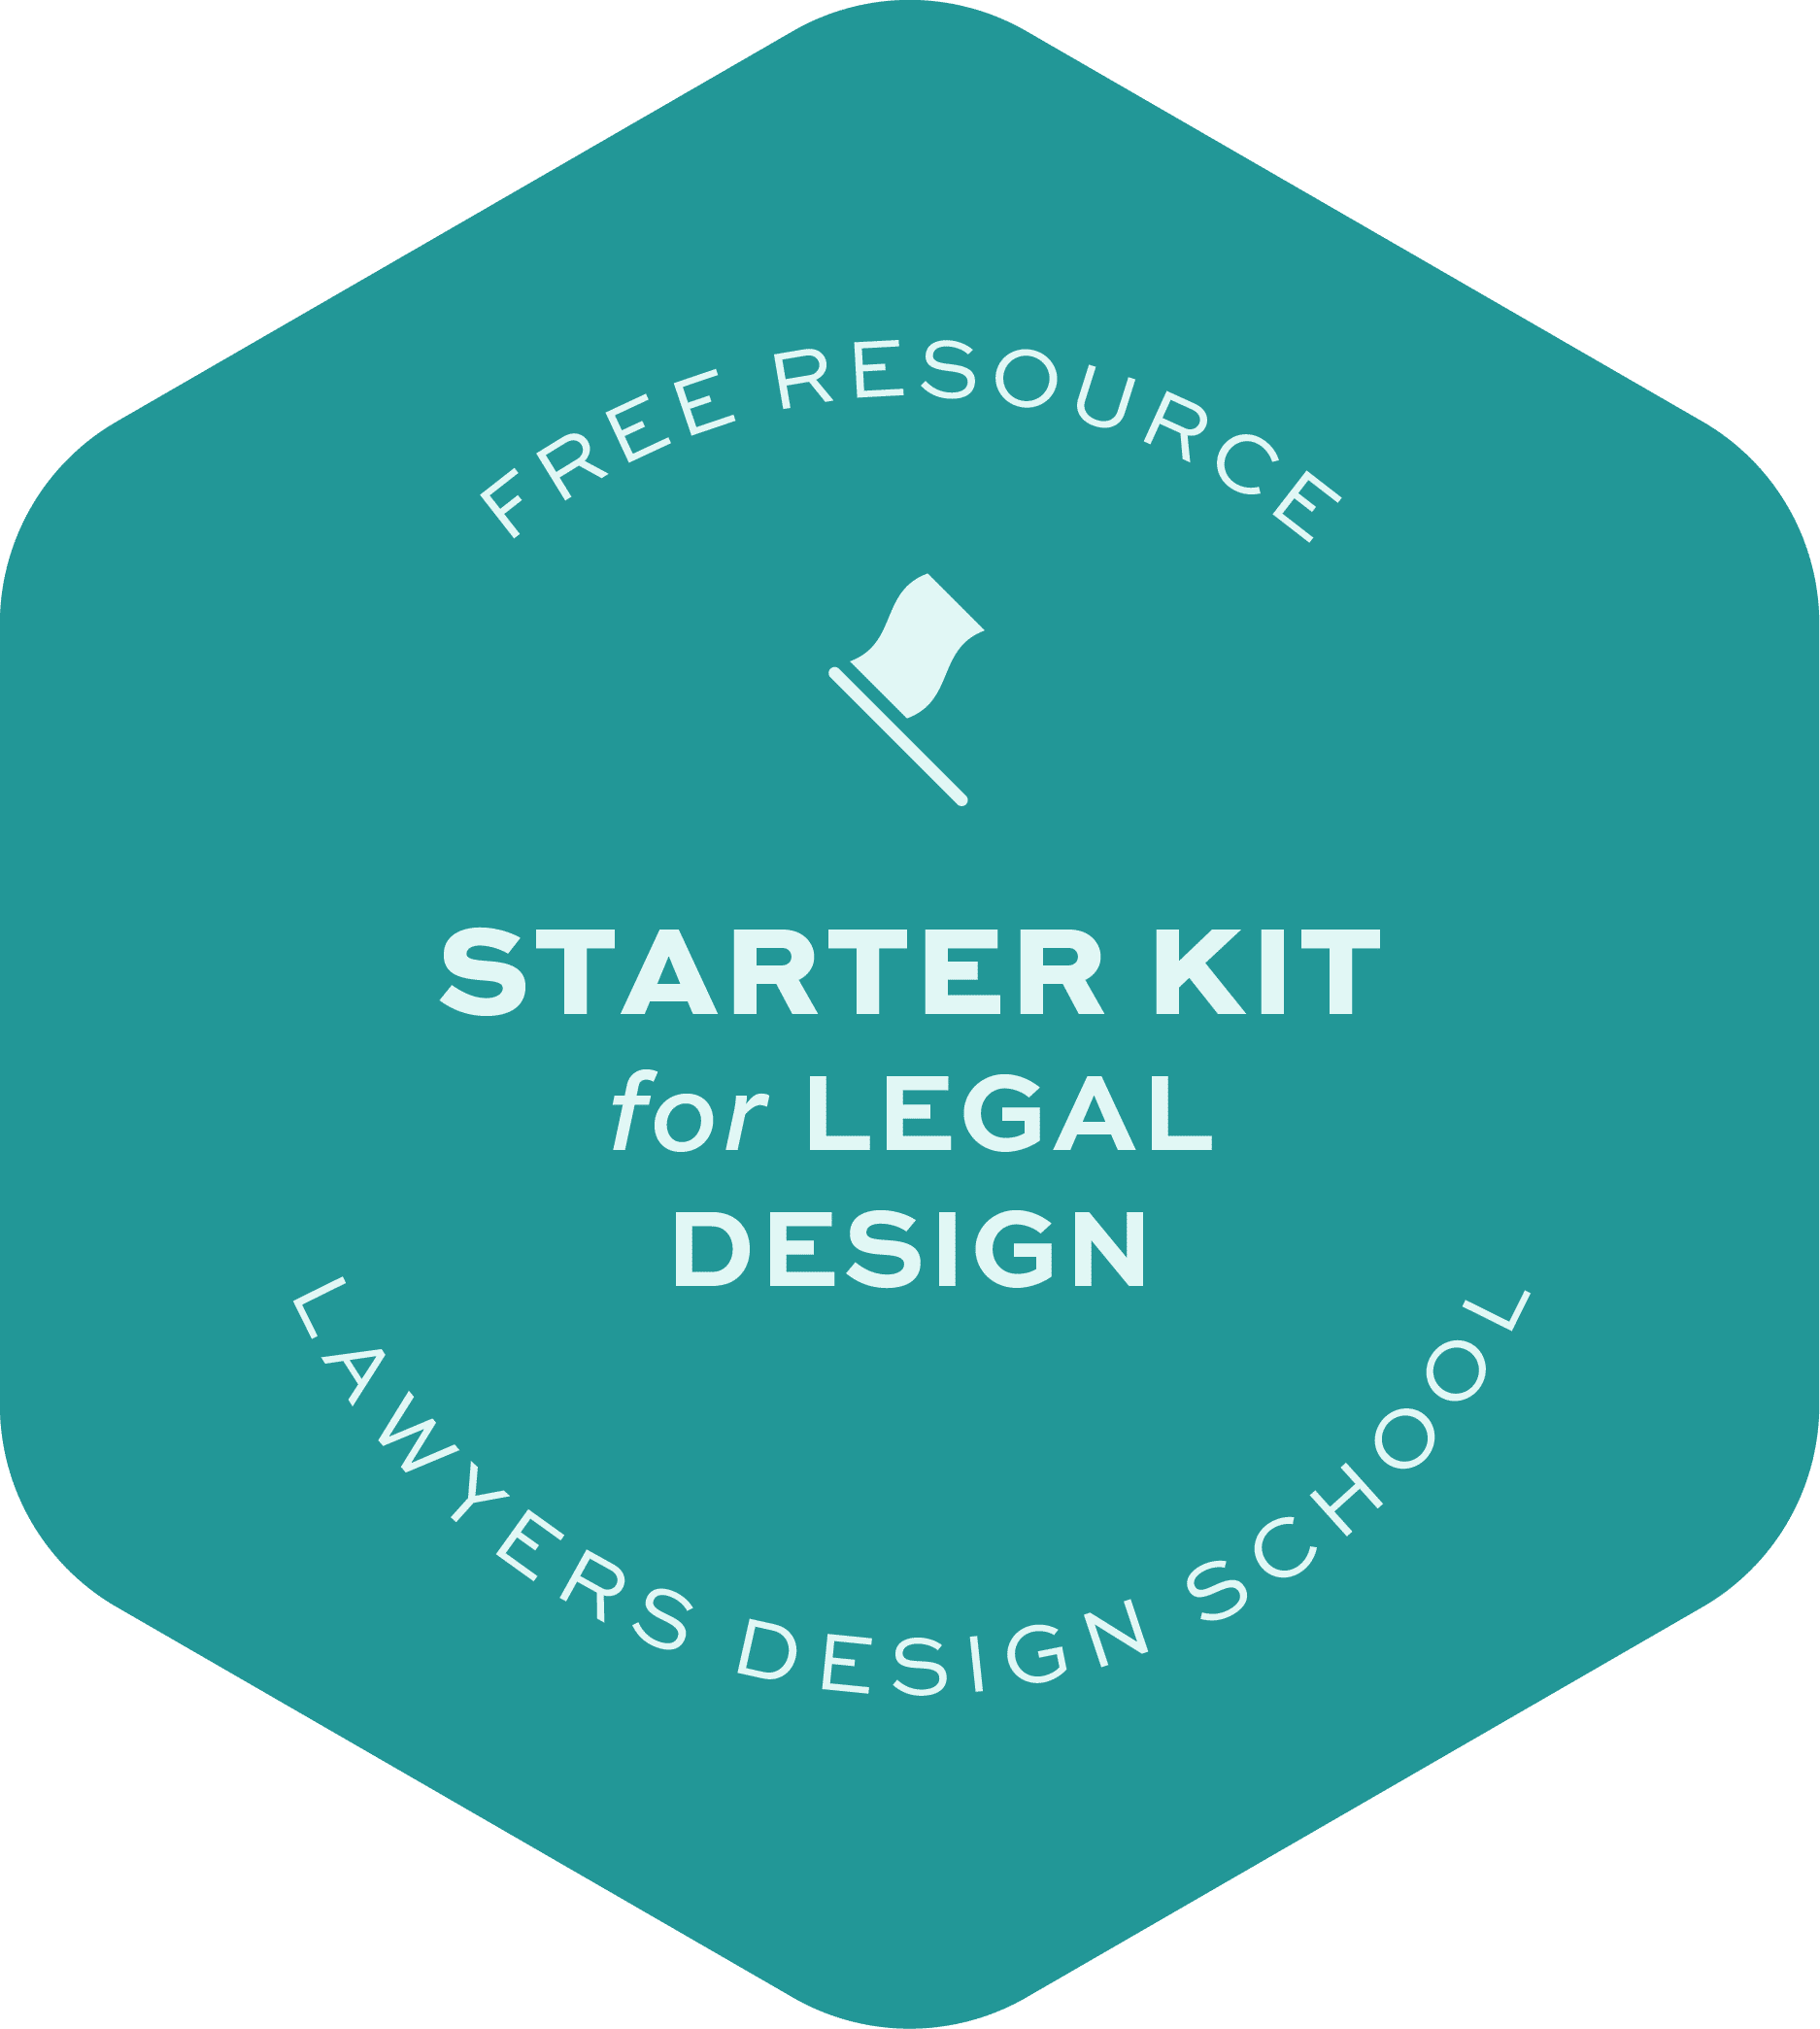 Starter Kit for Legal Design
Free resource to kickstart your journey to legal design today